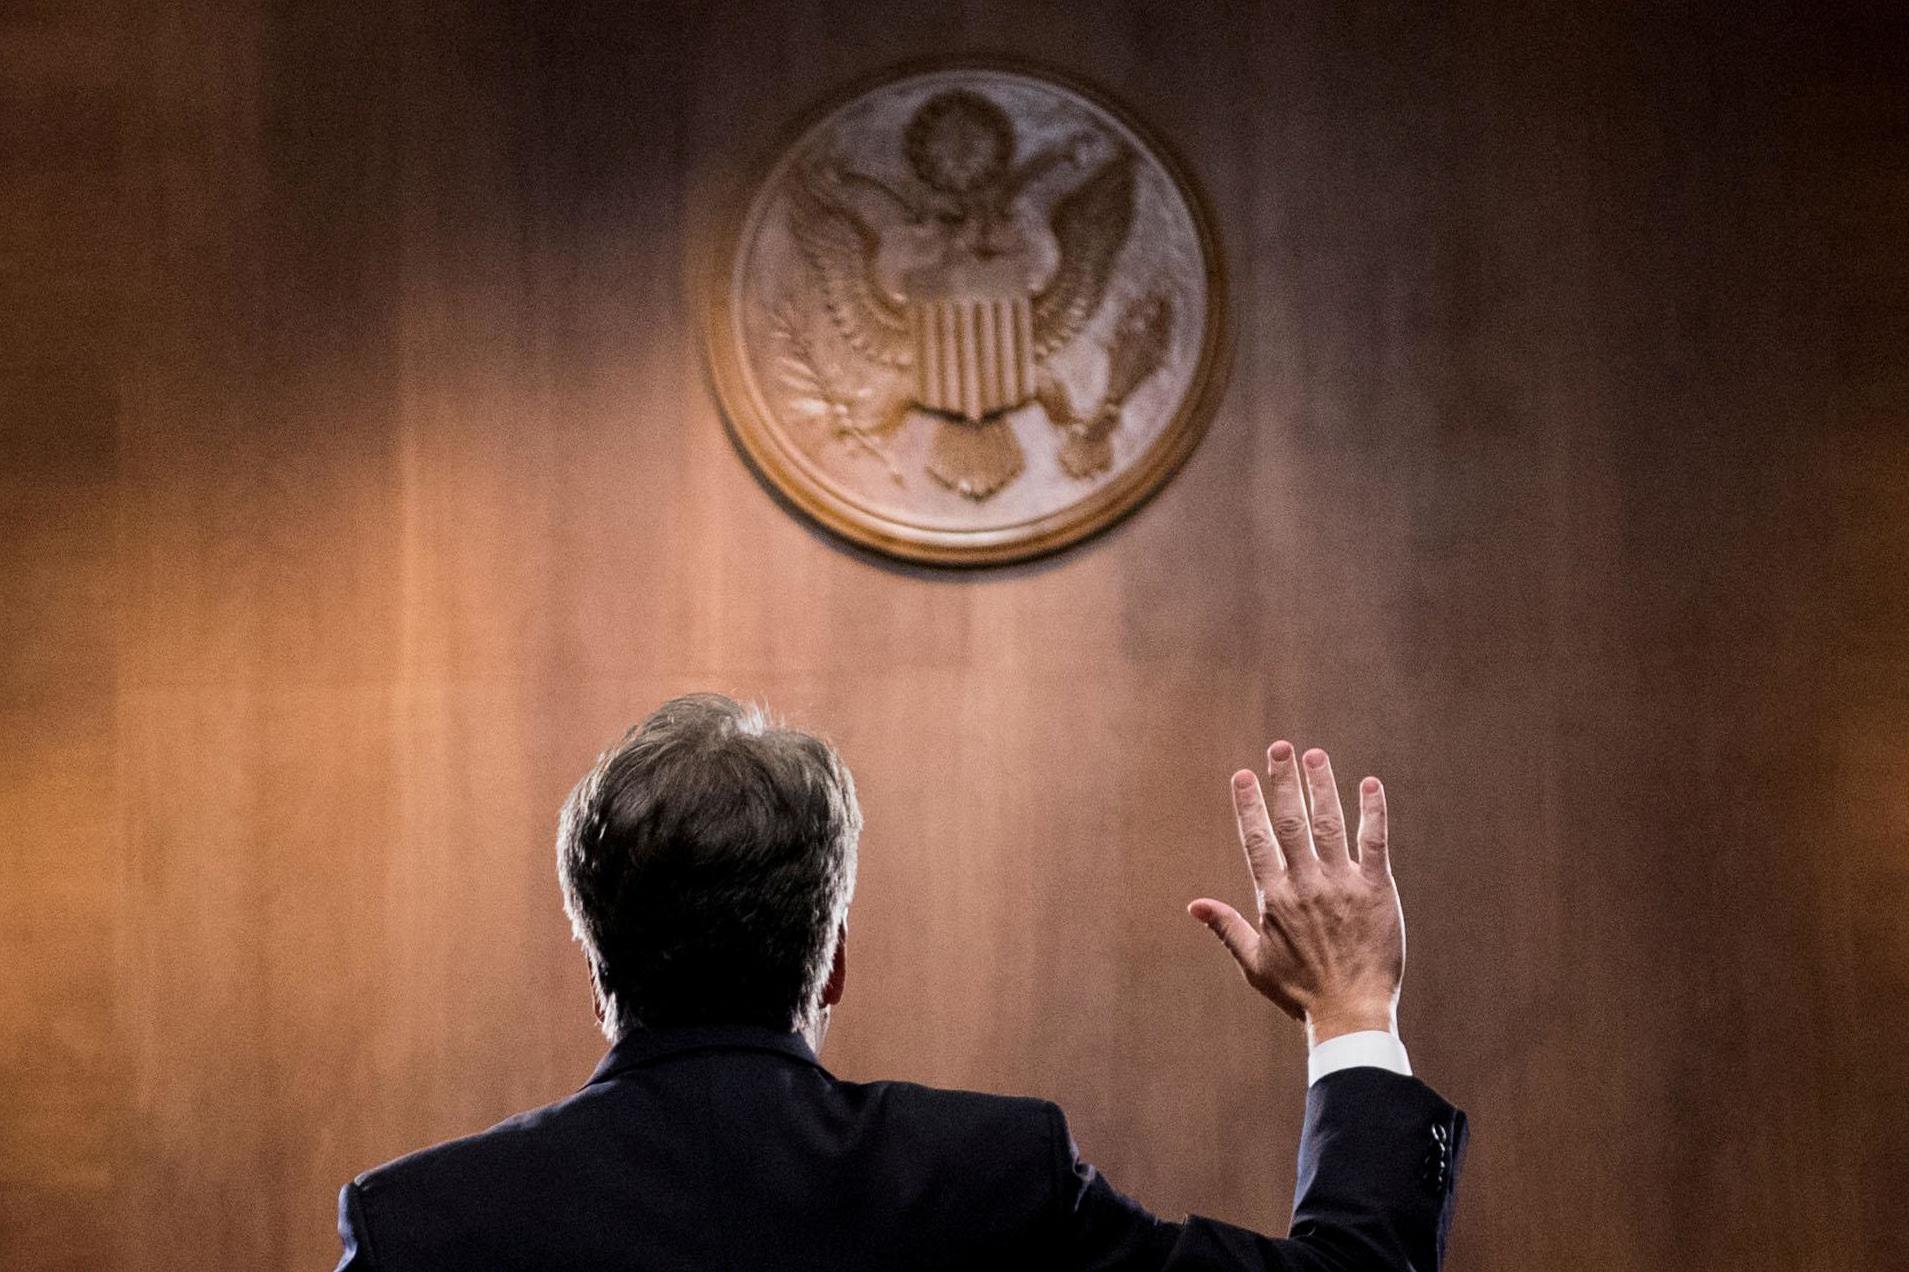 The judge is sworn in before testifying before the US Senate Judiciary Committee in Capitol Hill